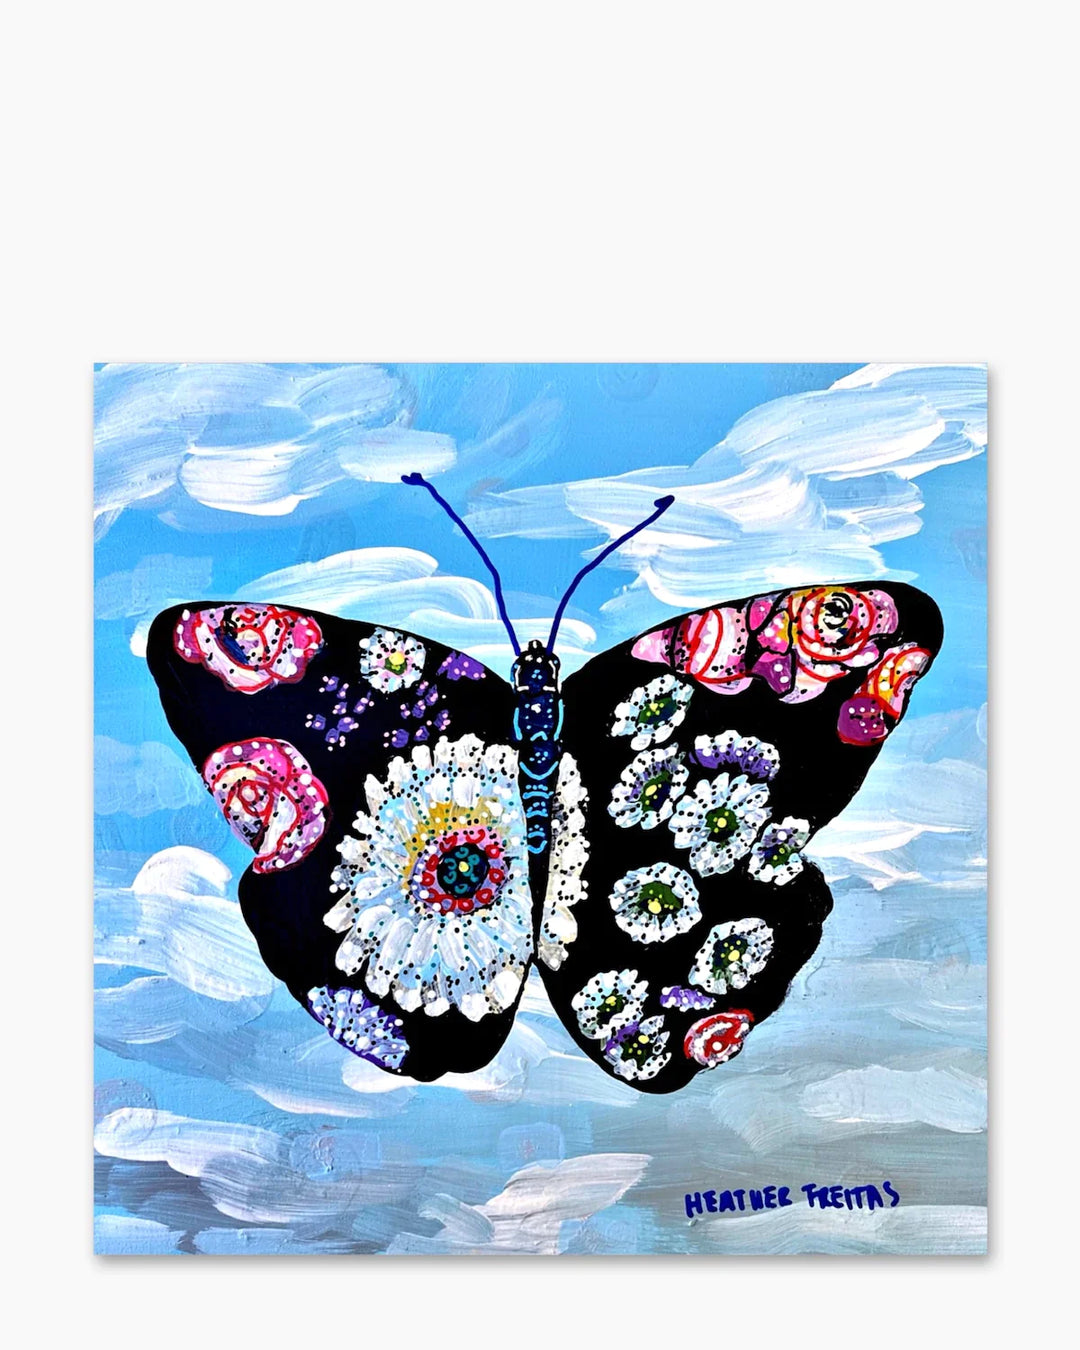 Drama Floral Butterfly ( Original Painting ) - Heather Freitas - fine art home deccor